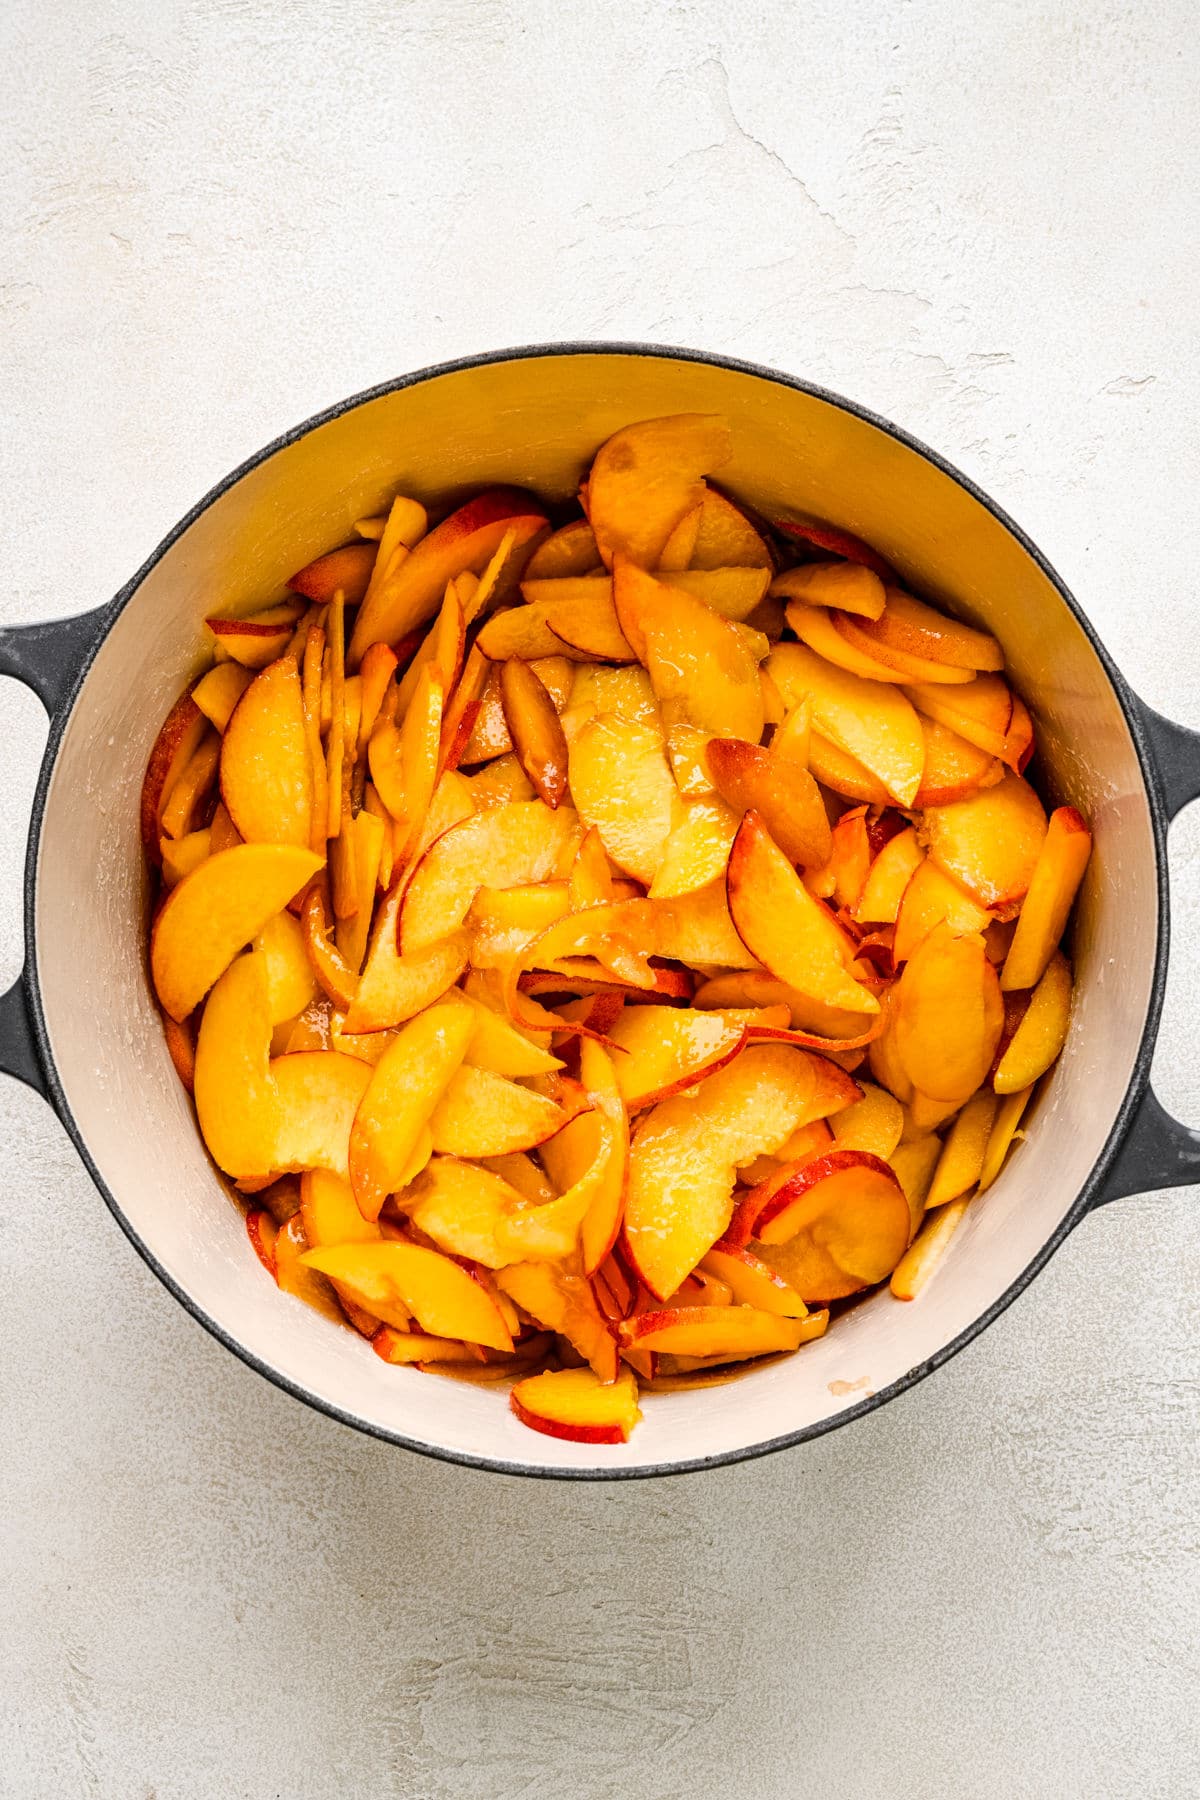 Peach slices with sugar lemon juice and water in a Dutch oven.